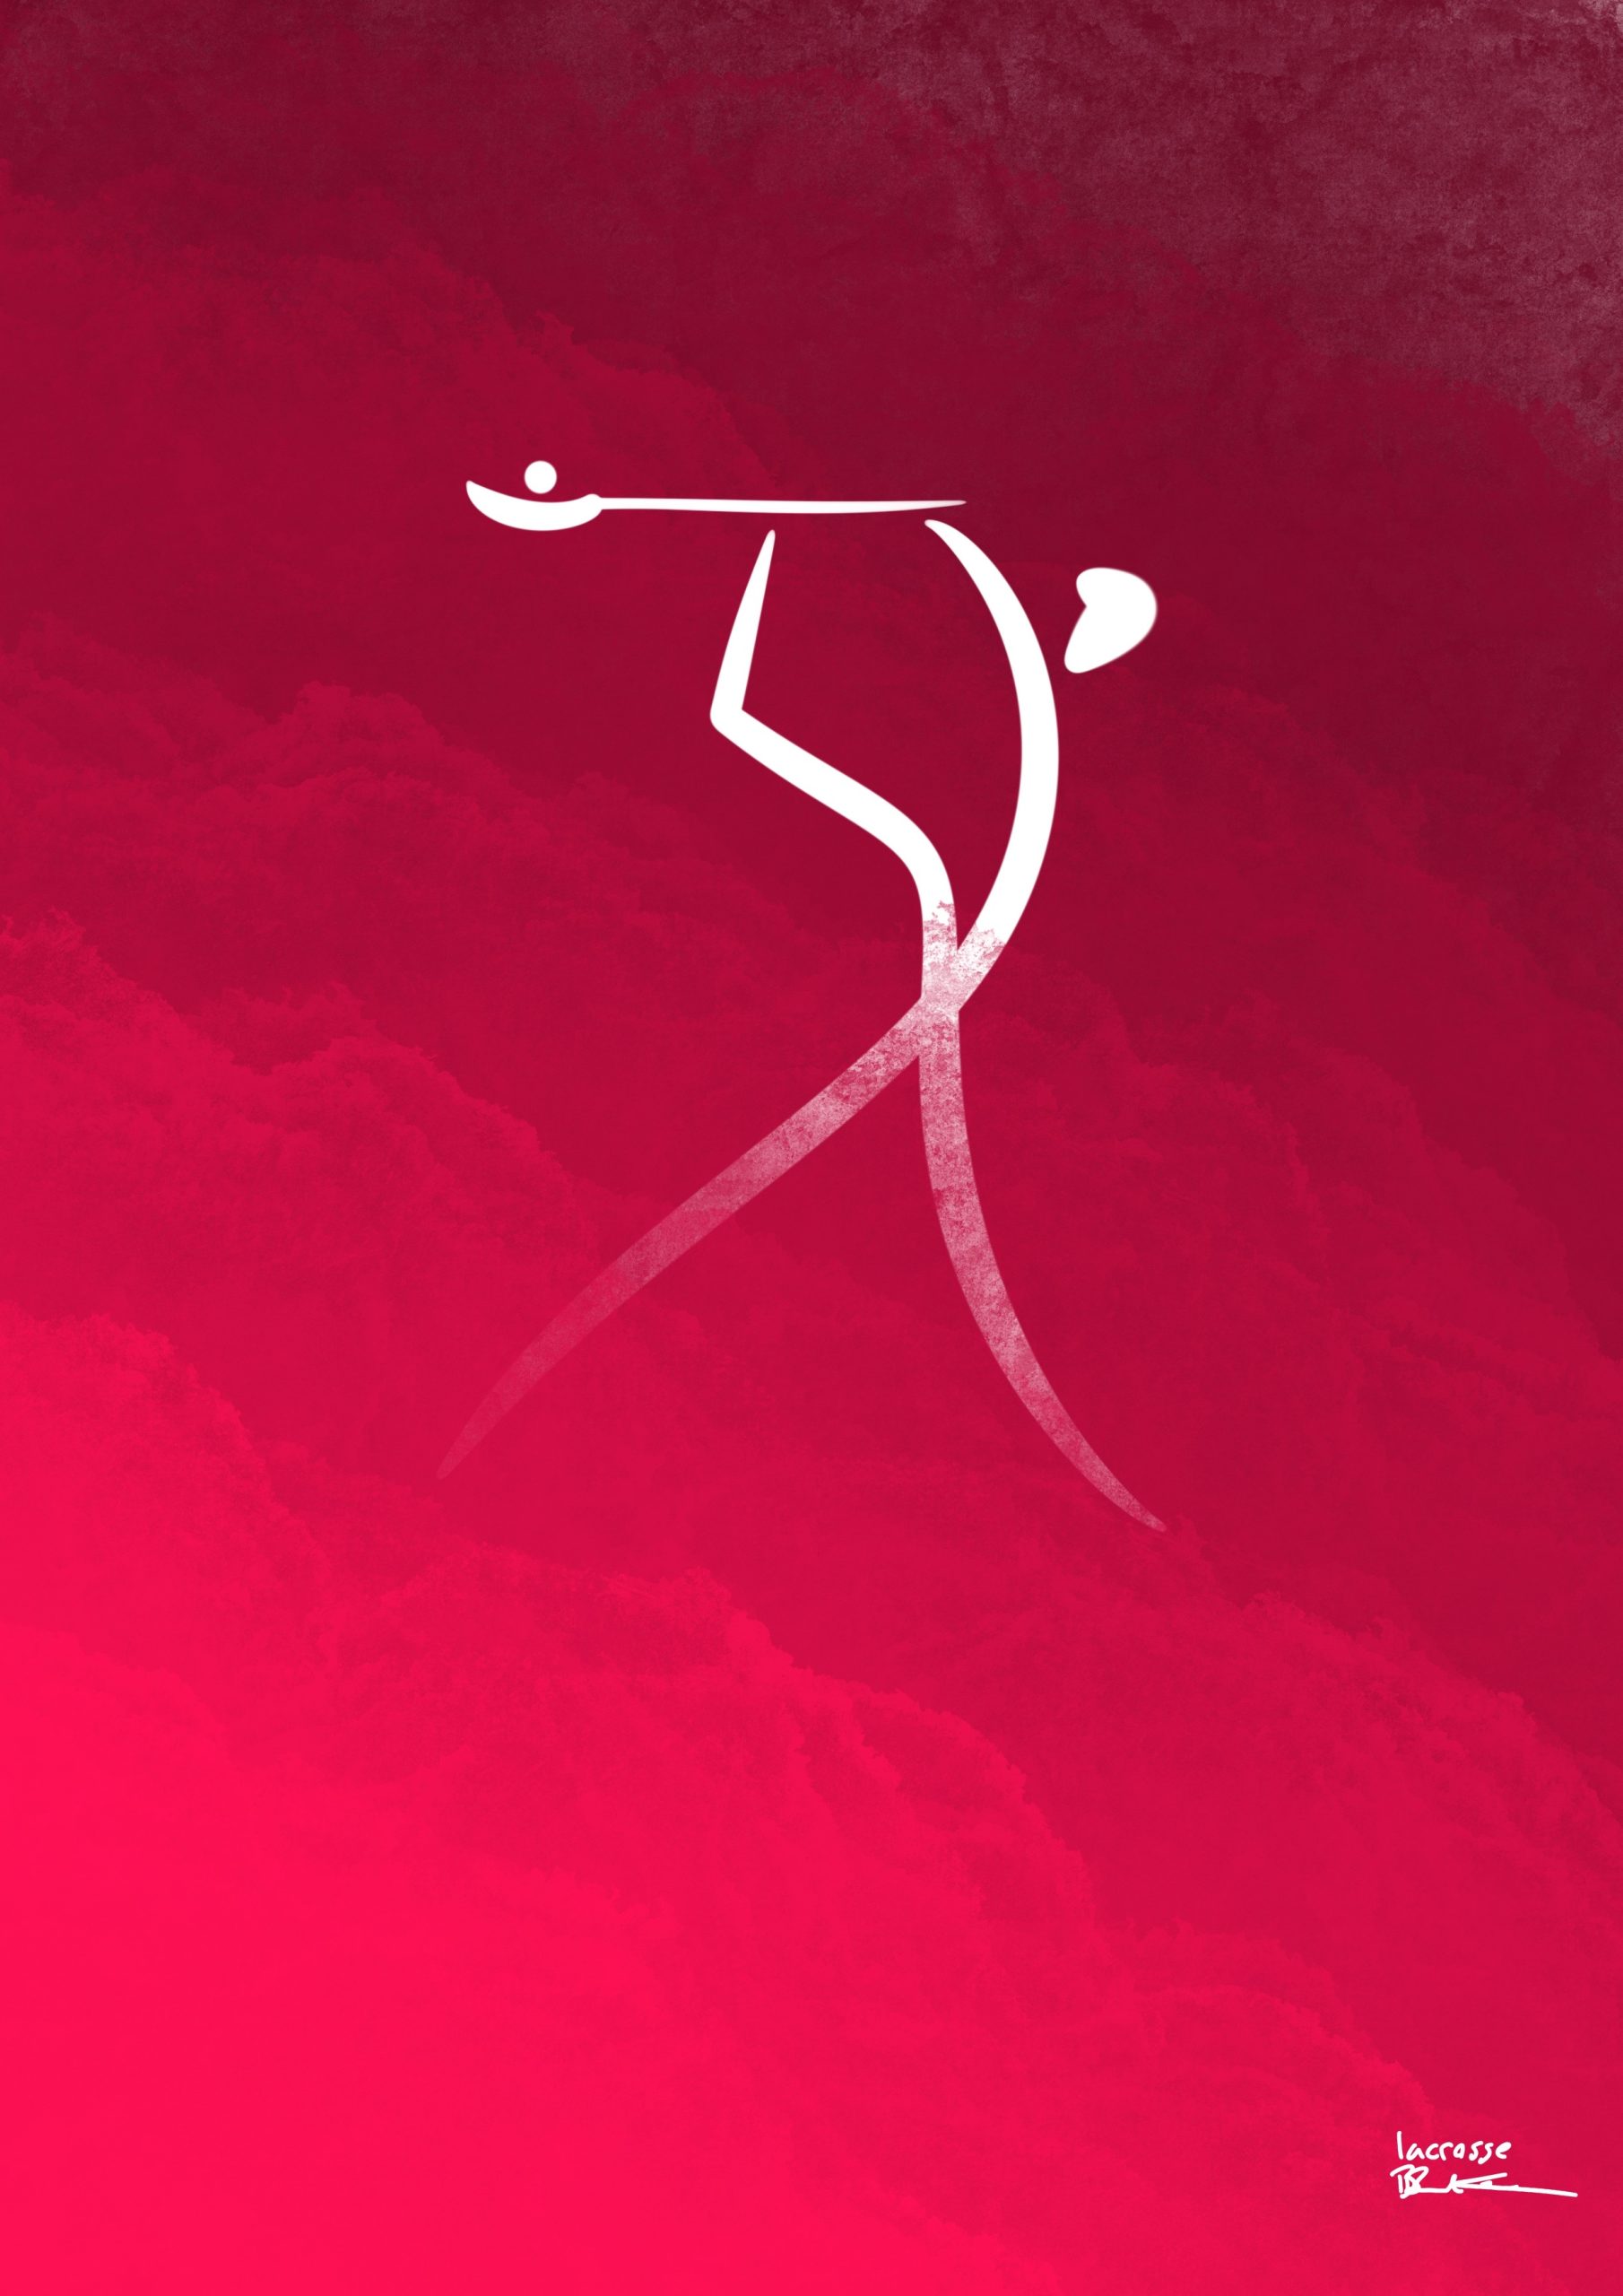 A minimalist linework design of a lacrosse player getting ready to throw overhead against a gradient red background.